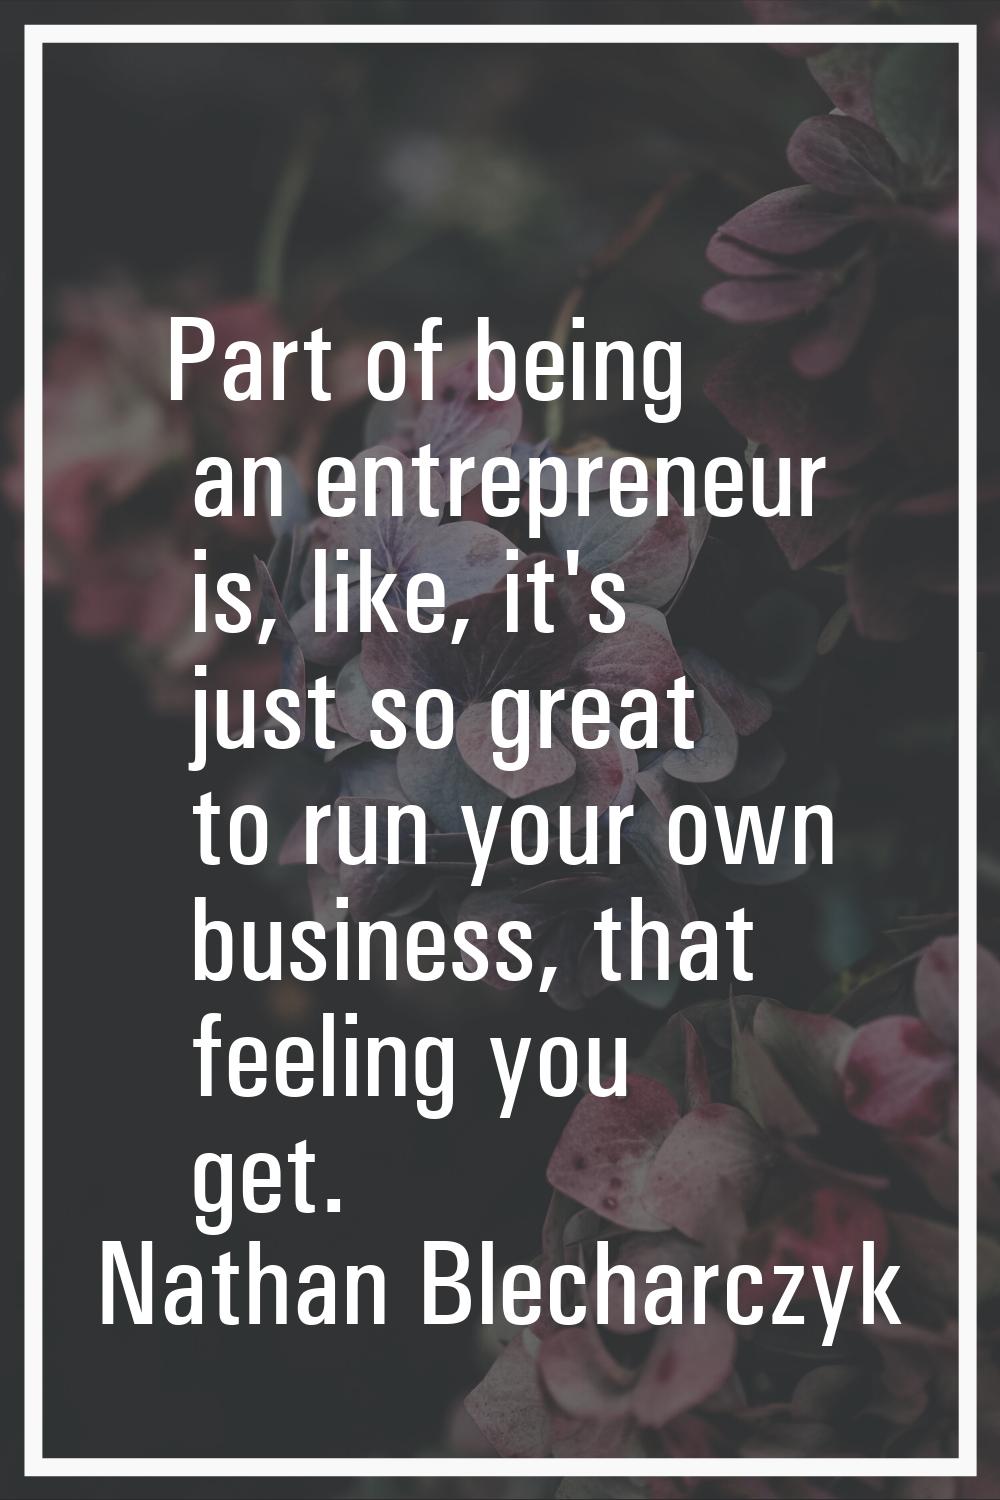 Part of being an entrepreneur is, like, it's just so great to run your own business, that feeling y